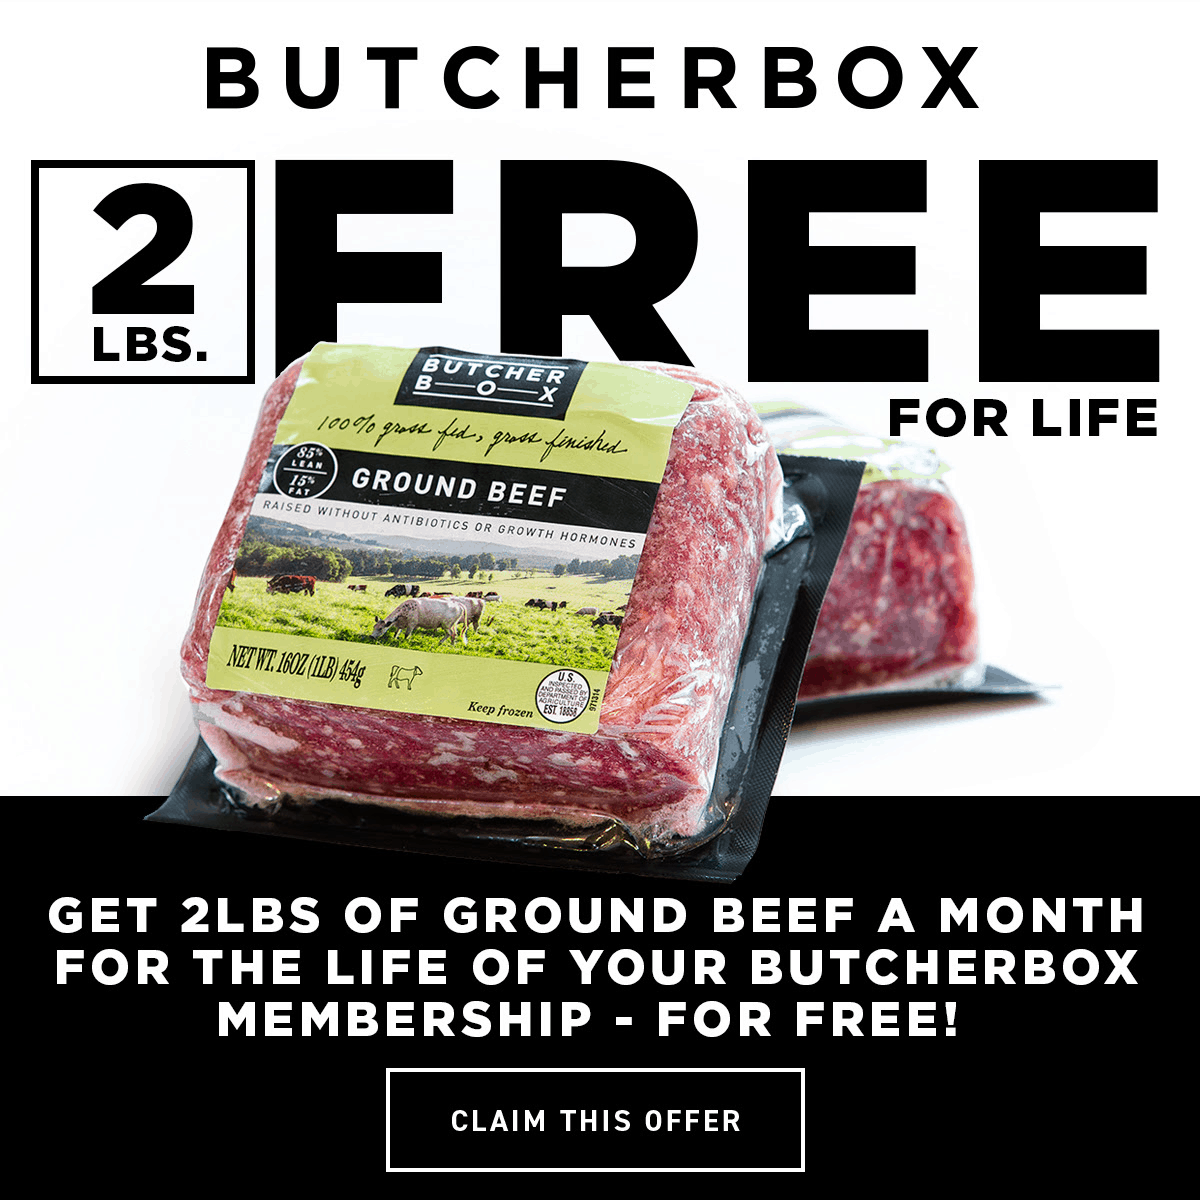 ButcherBox Deal: FREE Ground Beef For Life! - hello subscription